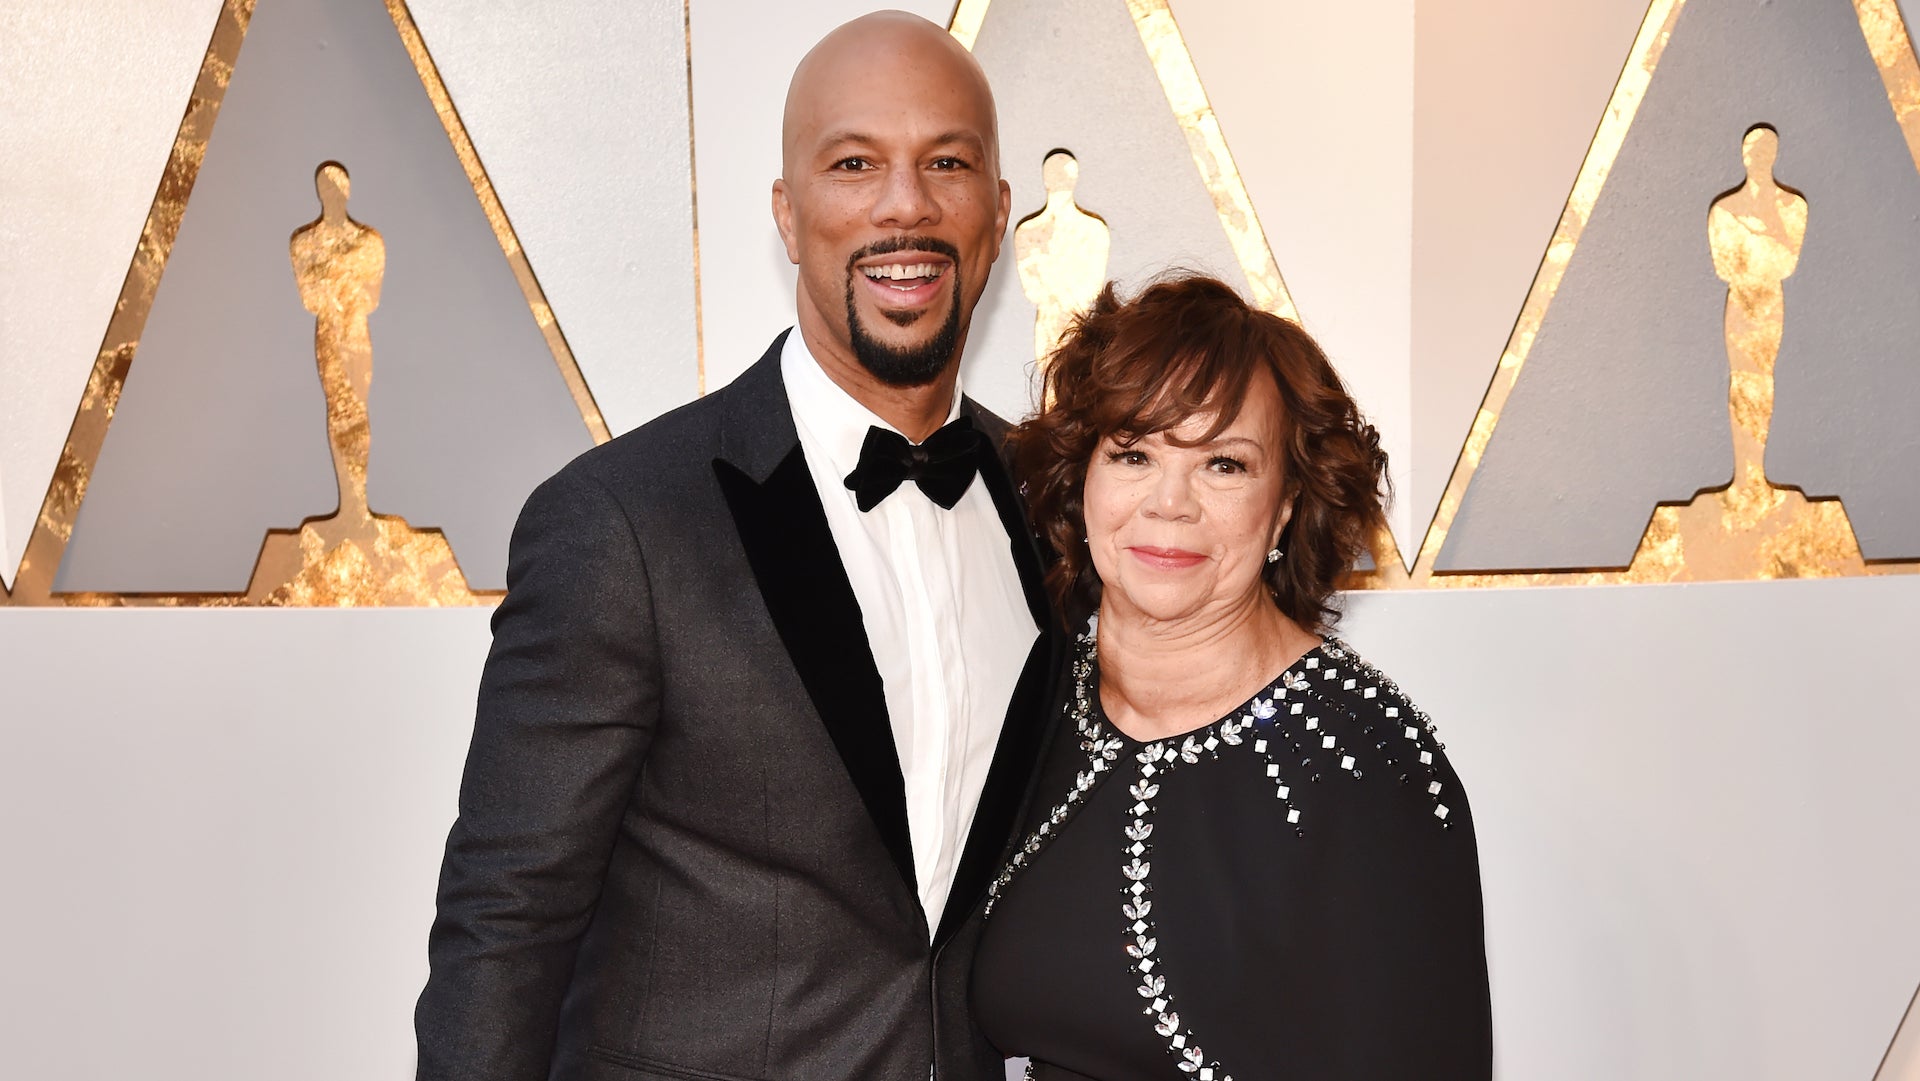 Common Shares How His Mom Reacted To Learning Of His Childhood Molestation: She Said, 'Are You Okay?'